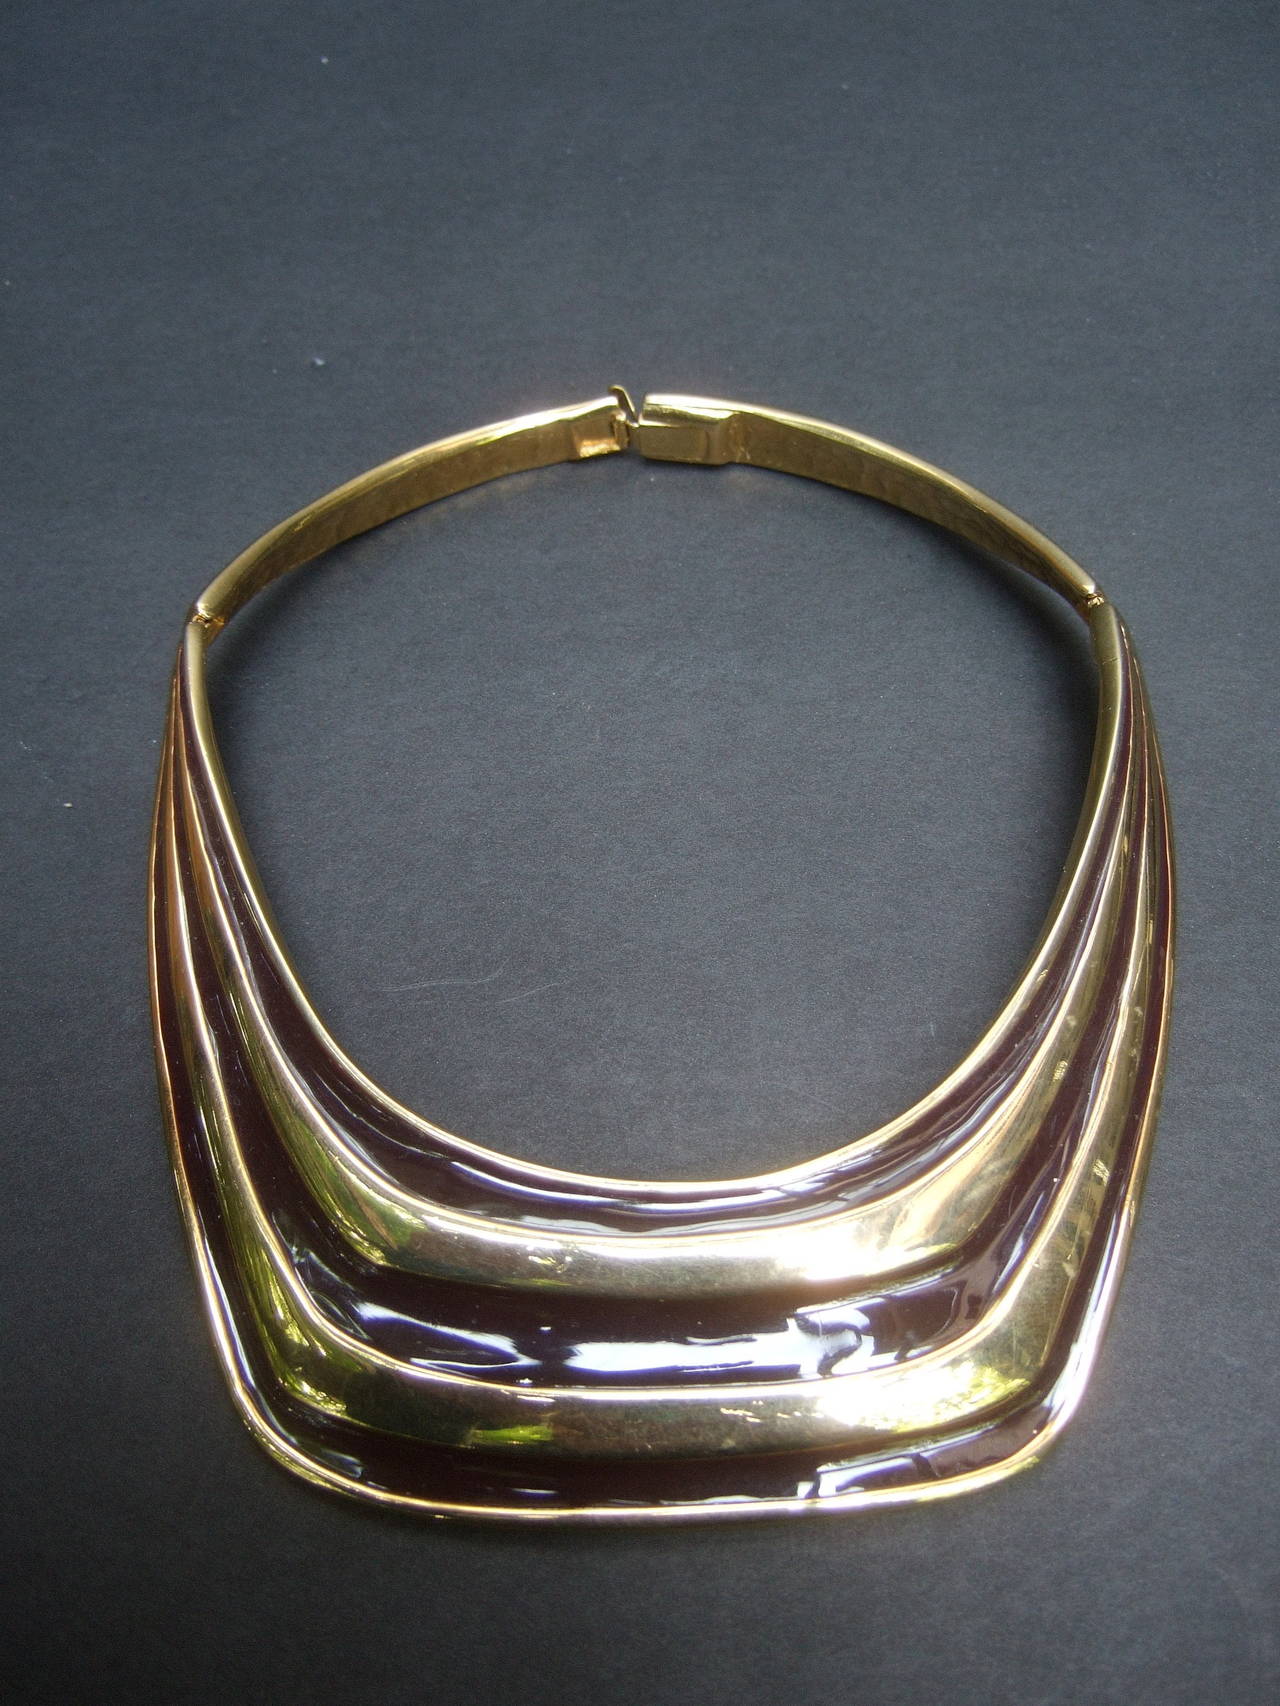 Alexis Kirk Sleek Brown & Gilt Enamel Choker Necklace Set c 1980 In Excellent Condition For Sale In University City, MO